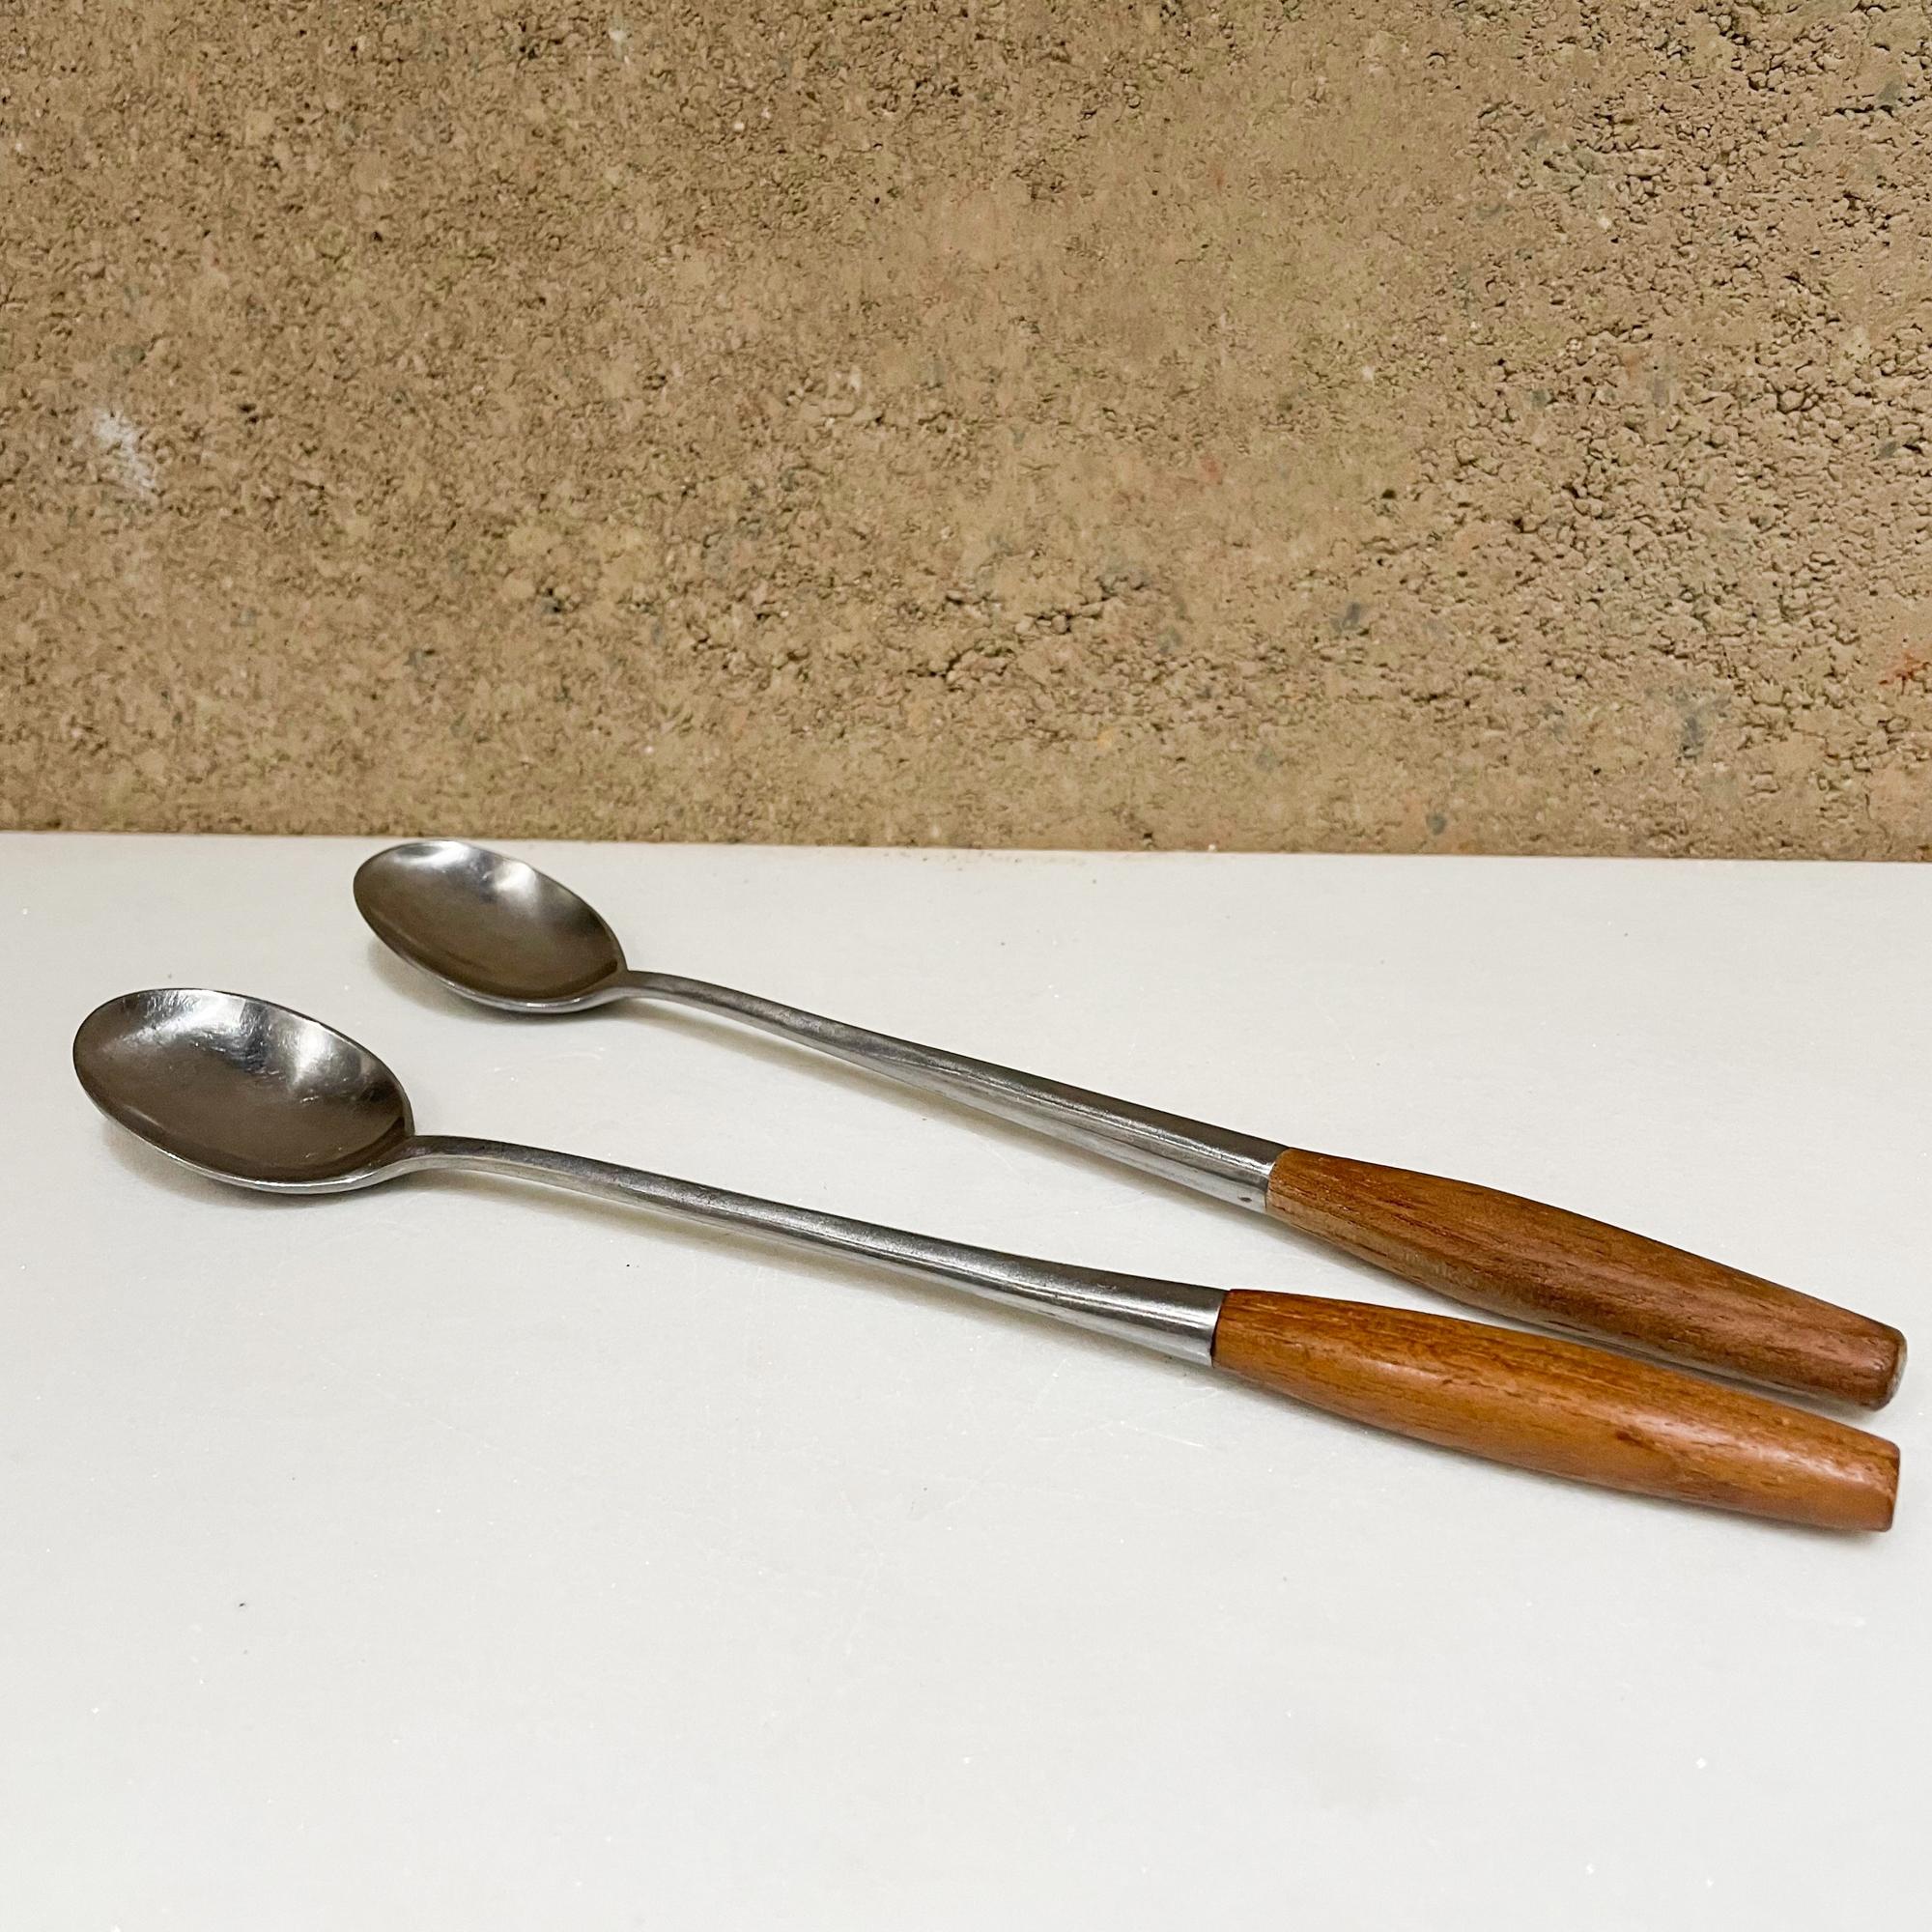 Two long bar cocktail spoons ice tea spoons
Dansk IHQ Fjord designs from Germany by Jens Quistgaard designed in 1954
Maker stamped.
Original unrestored preowned use vintage condition. See our images please.
Designed in teak wood and stainless